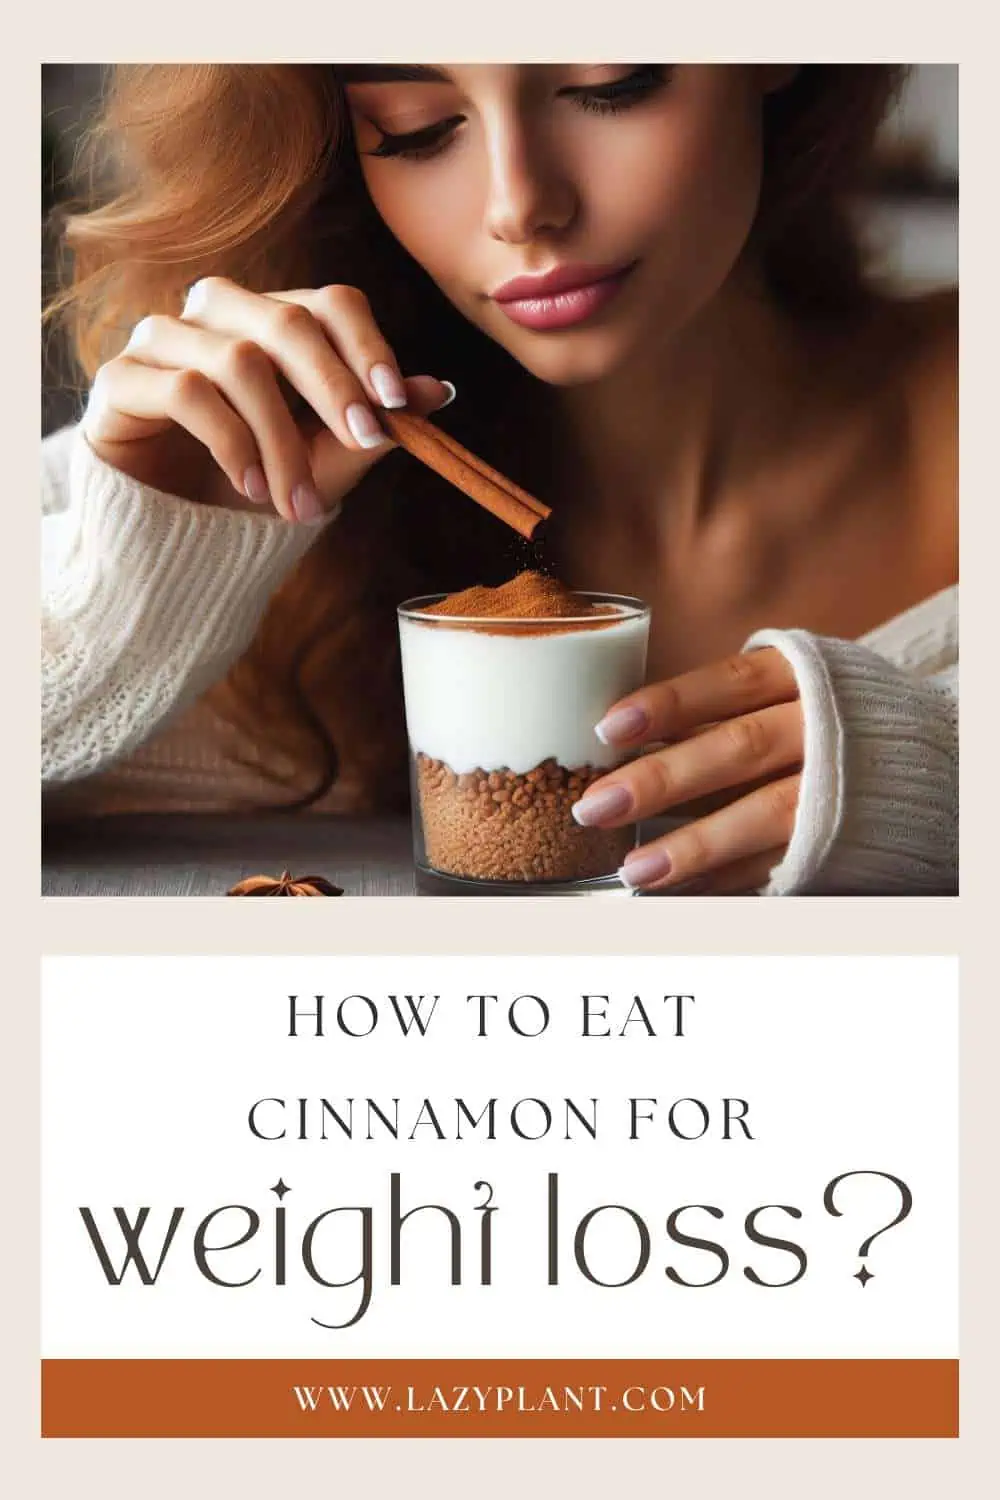 How to eat Cinnamon for weight loss?